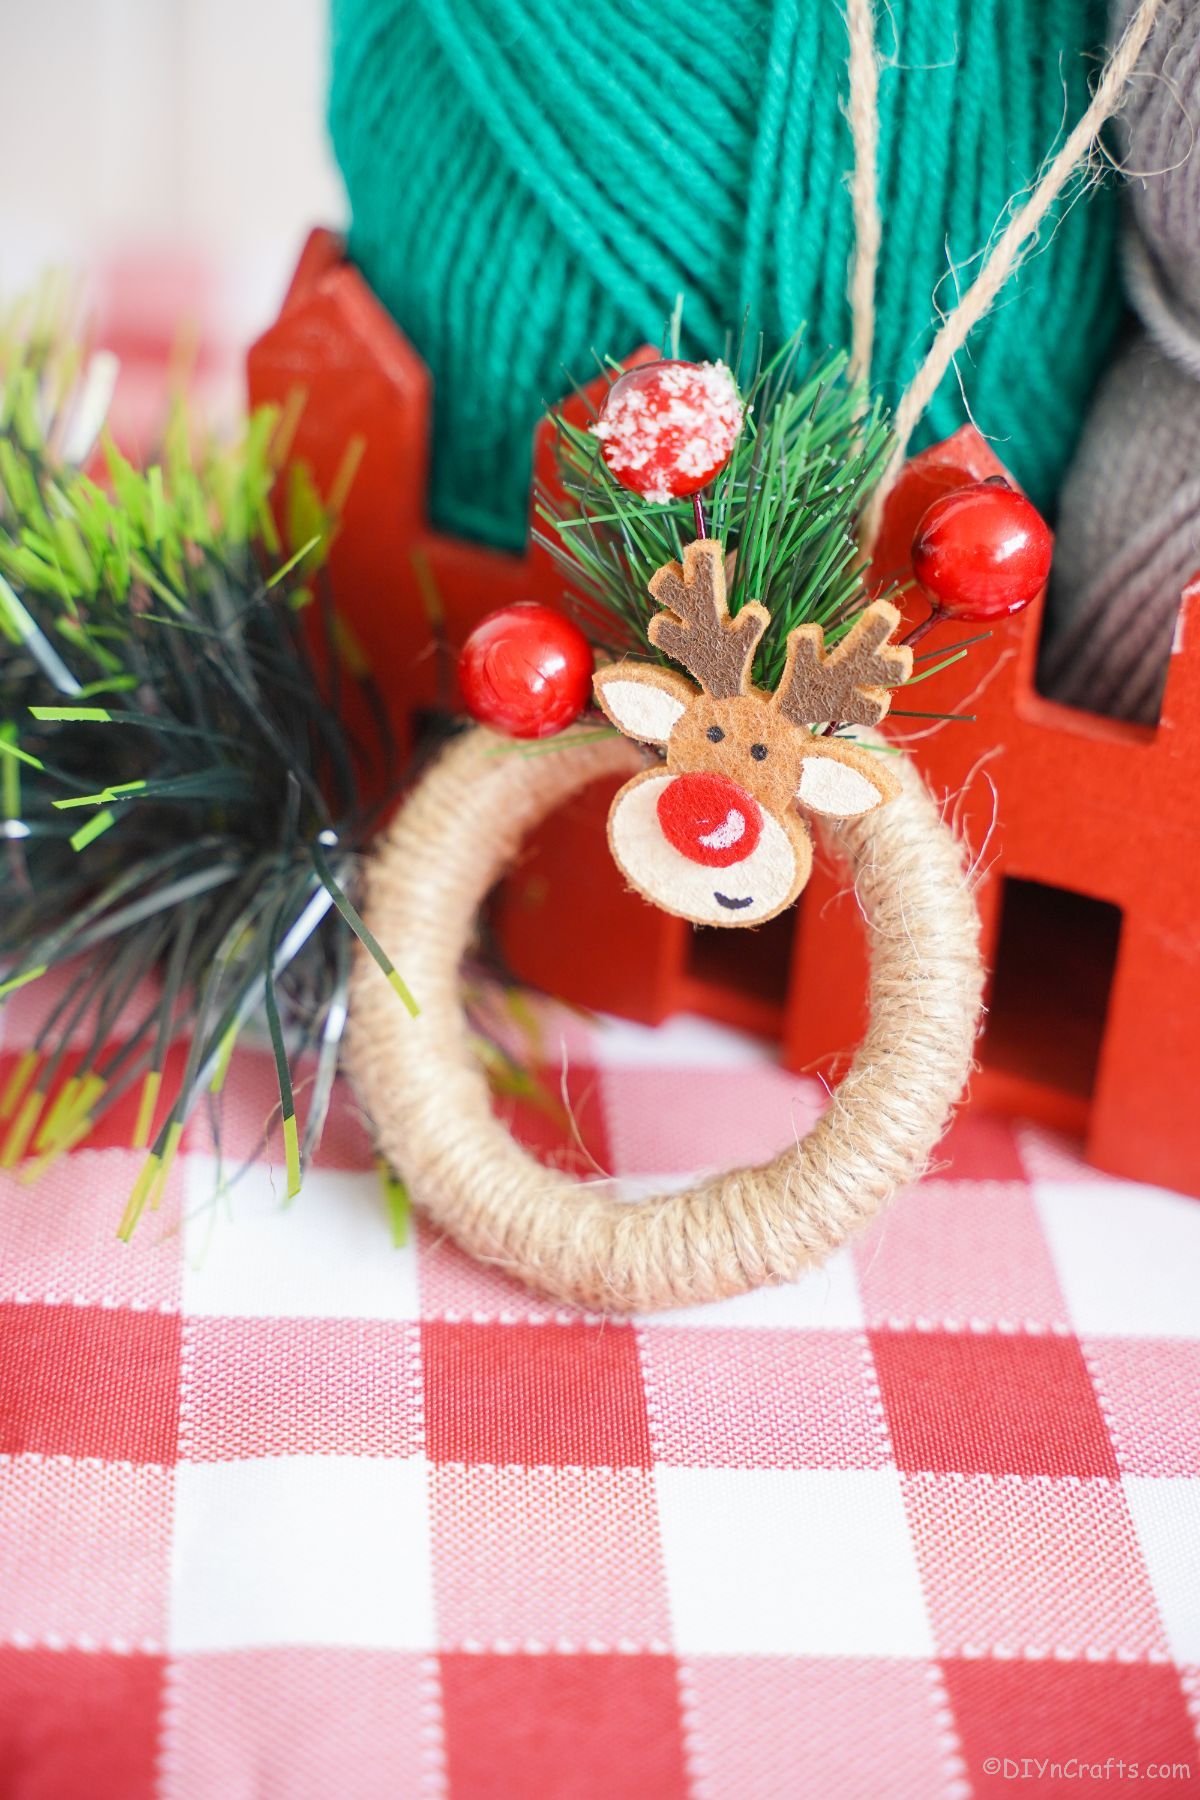 mini wreath ornament leaning against red basket on examined tablecloth